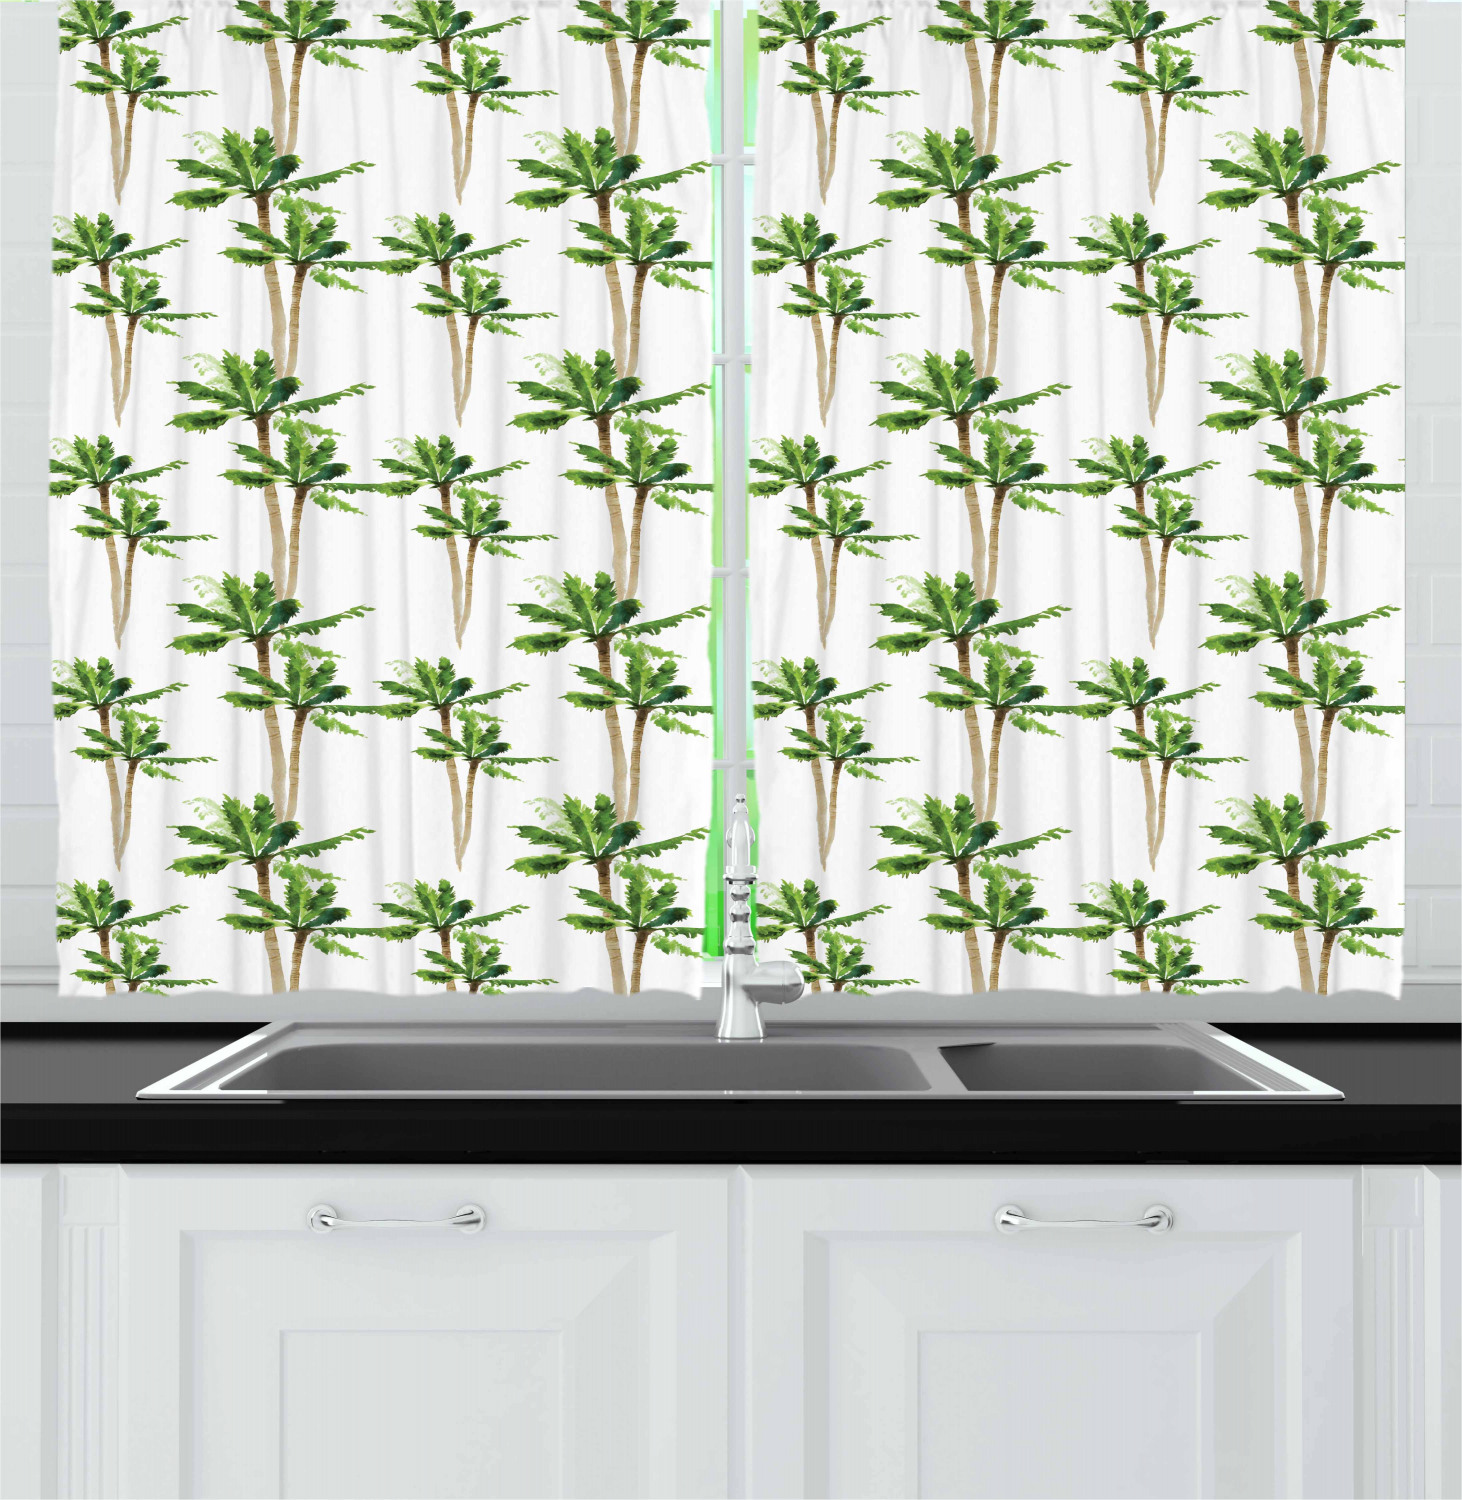 Tropical Hawaii Kitchen Curtains 2 Panel Set Window Drapes 55" X 39" Ambesonne 